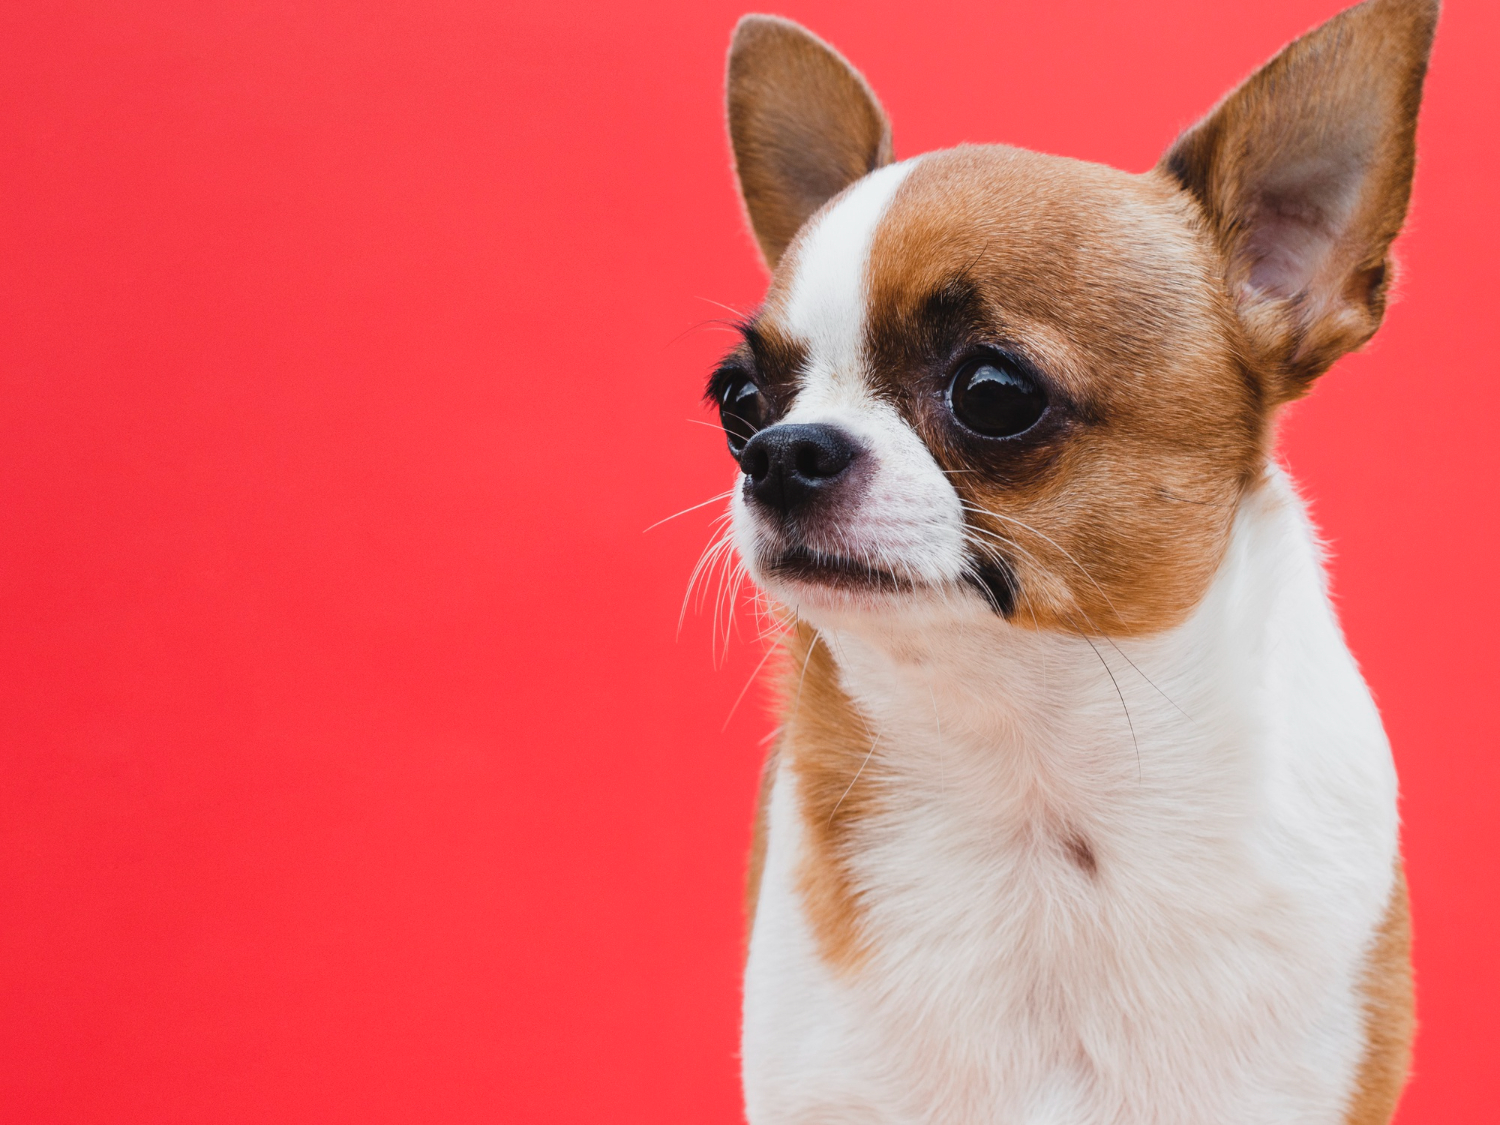 What is a good temperature for a chihuahua dog?